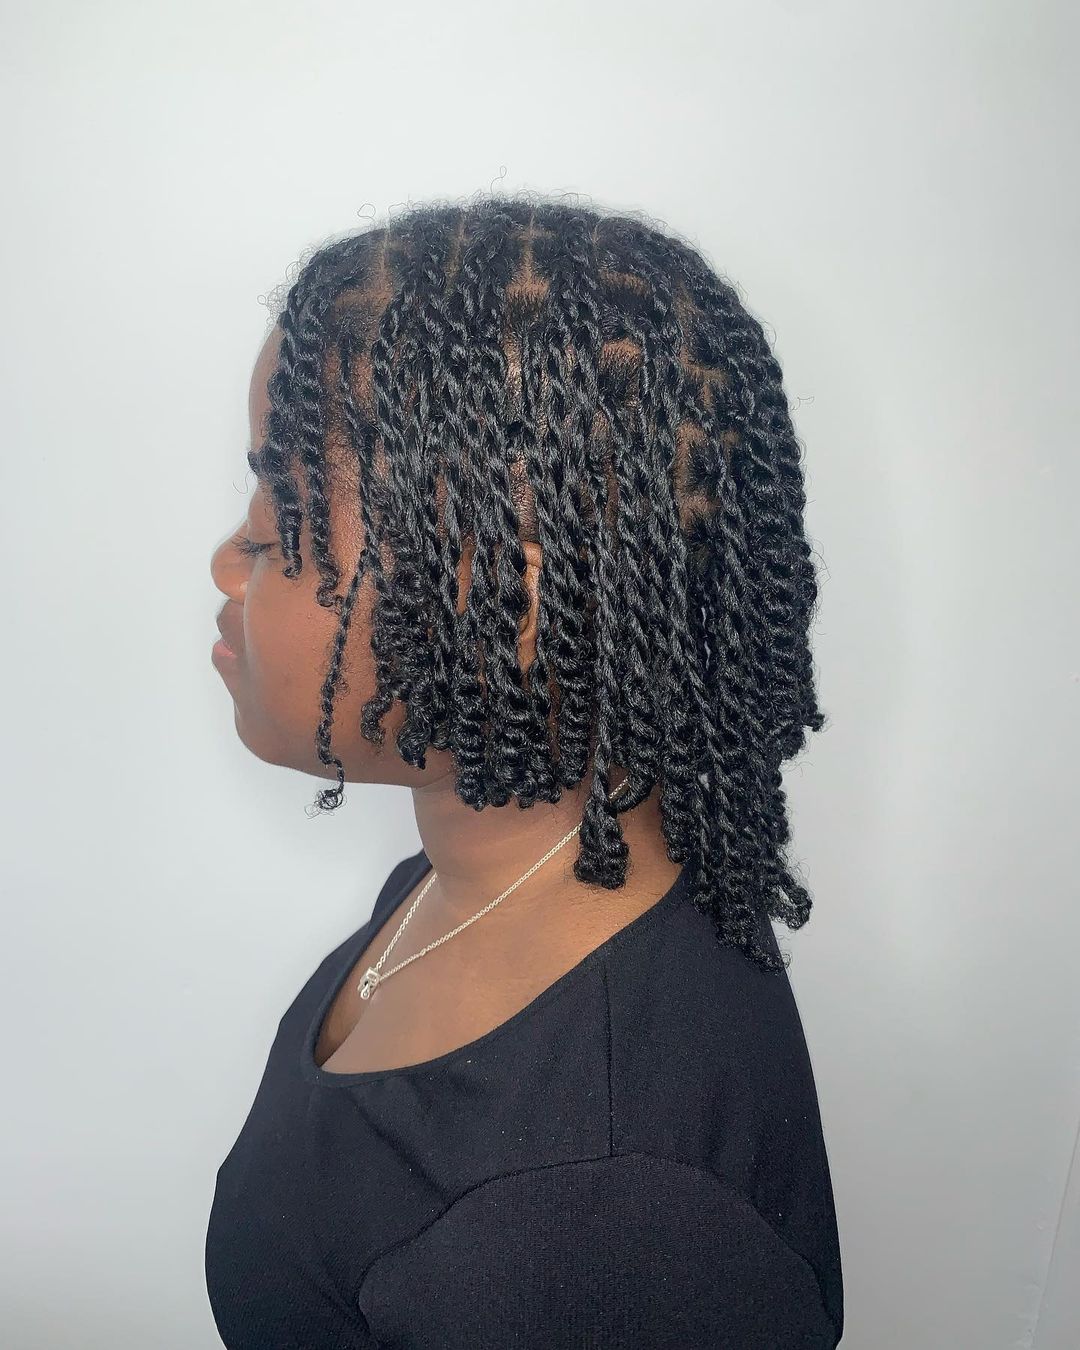 11. Medium Two Strand Short Twists On Natural Hair With Curly Ends